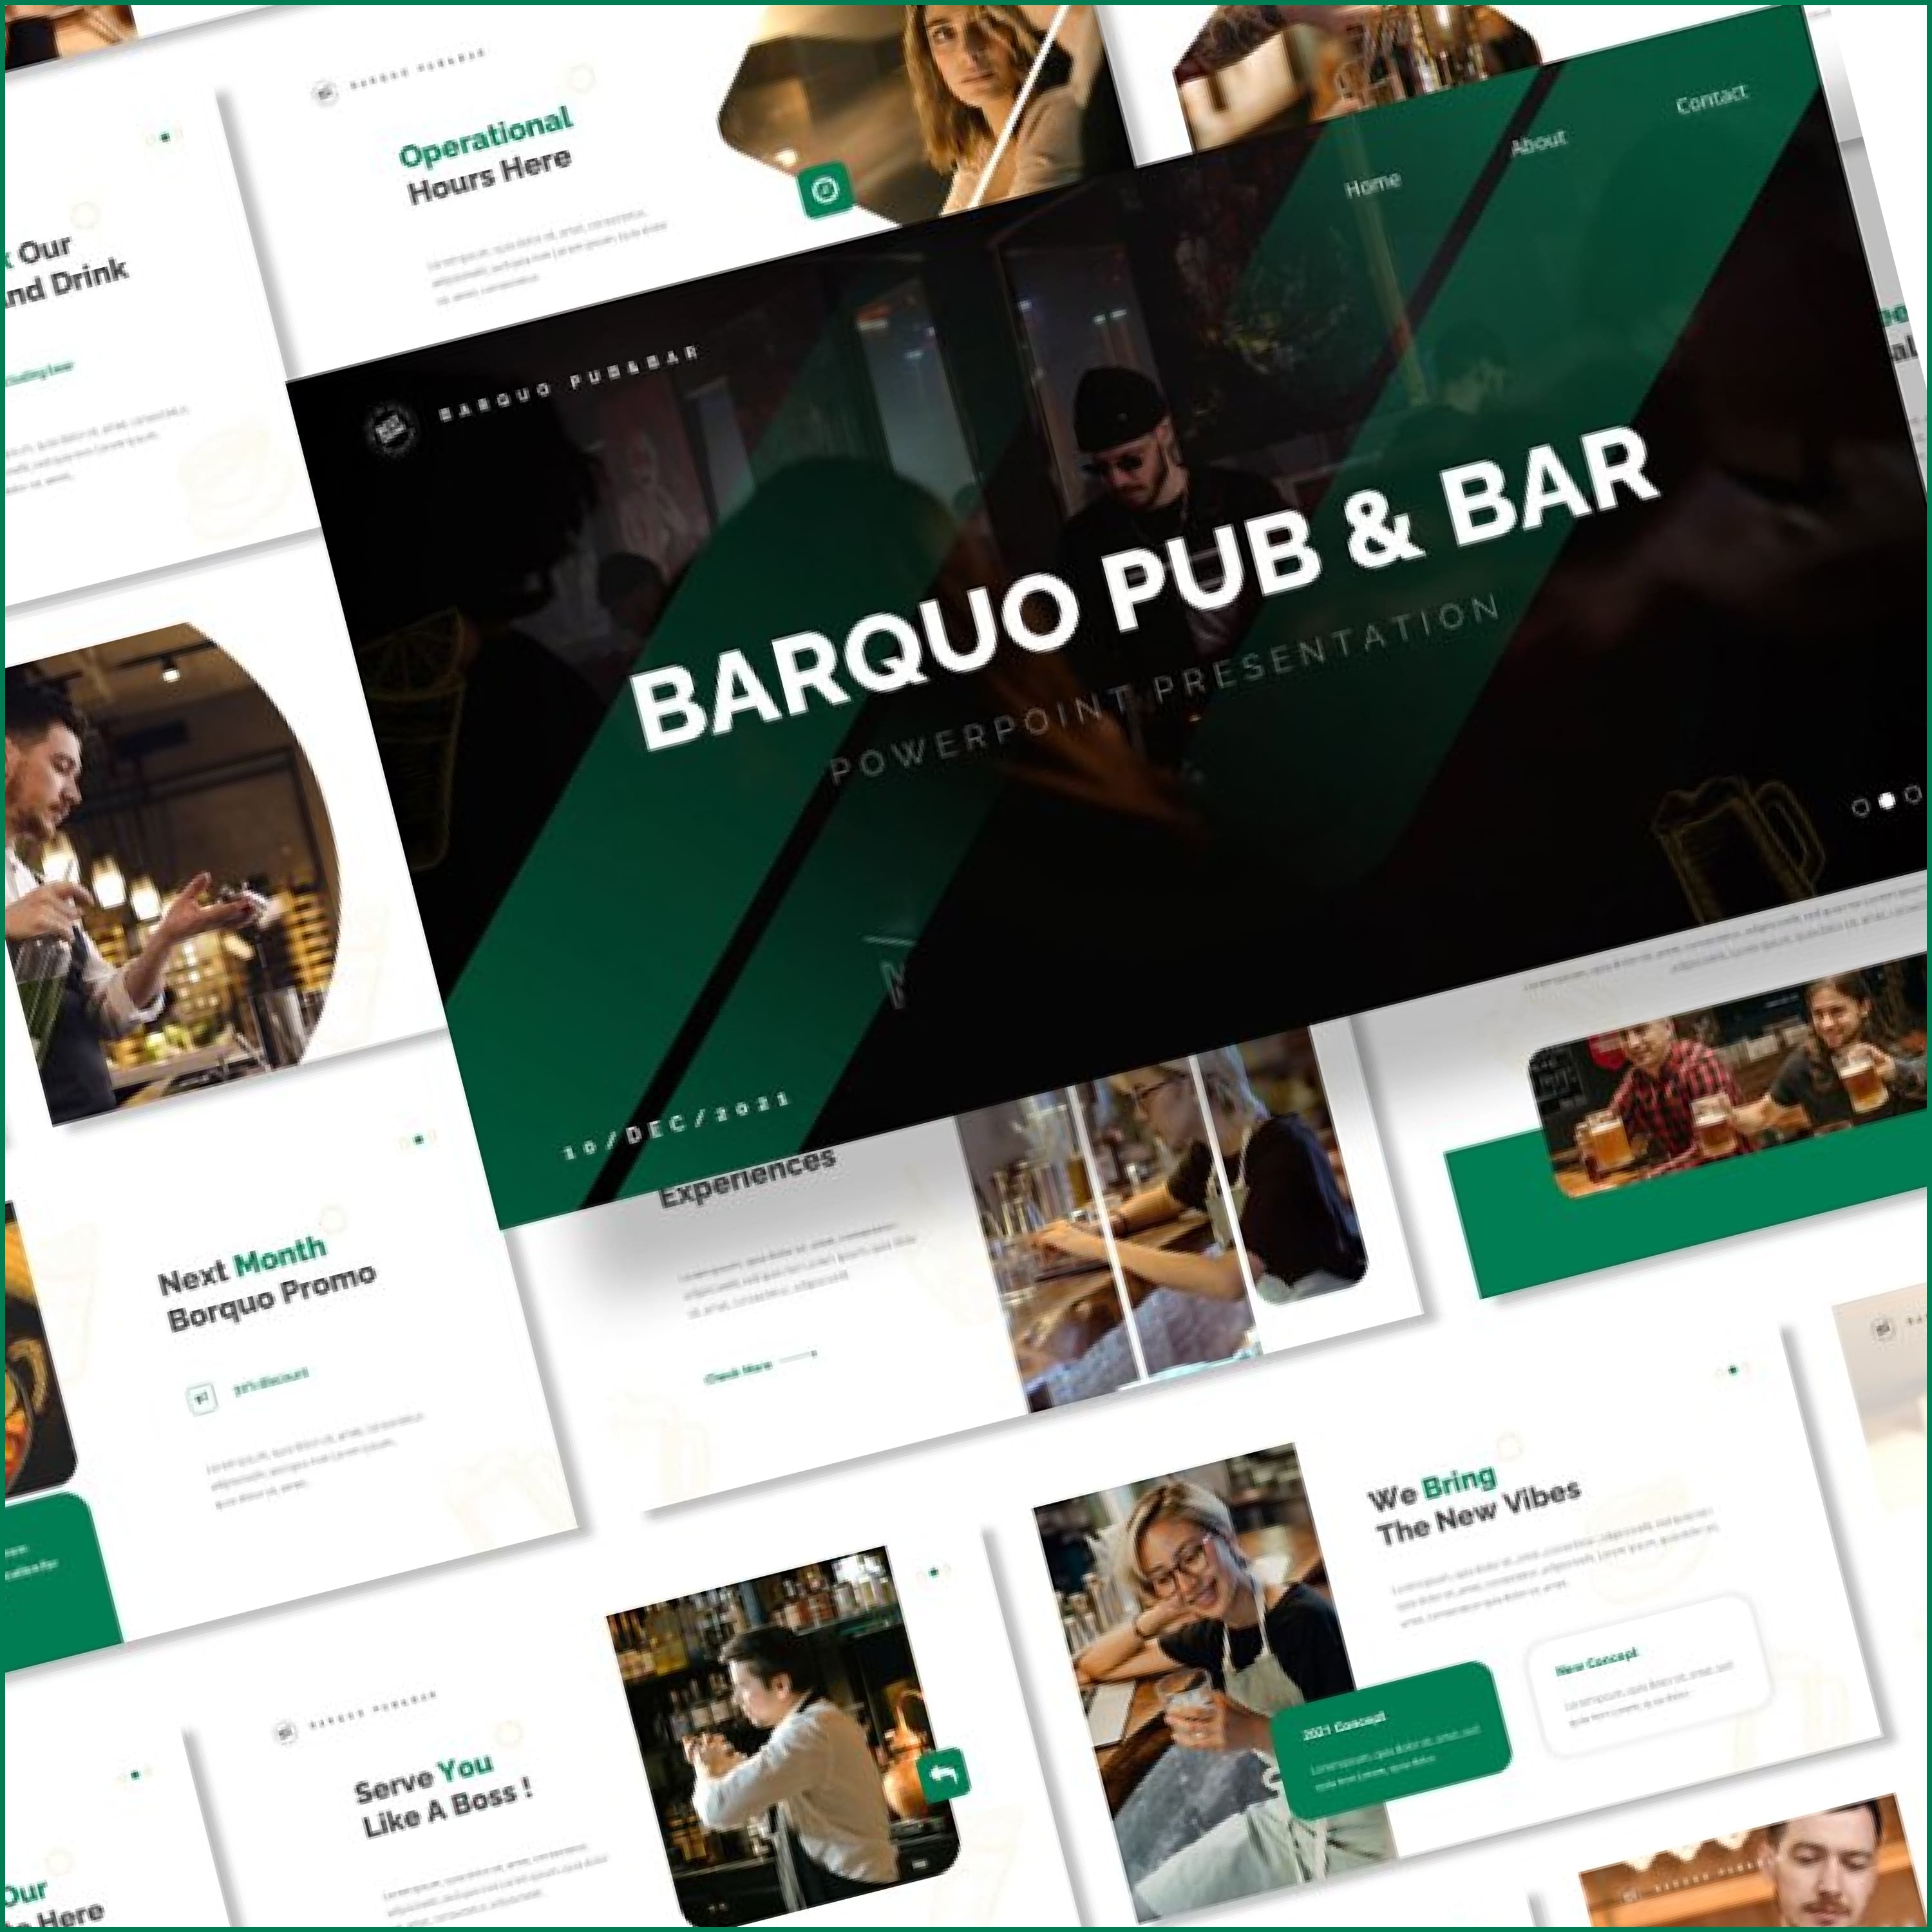 Barquo – Pub & Bar PowerPoint cover.